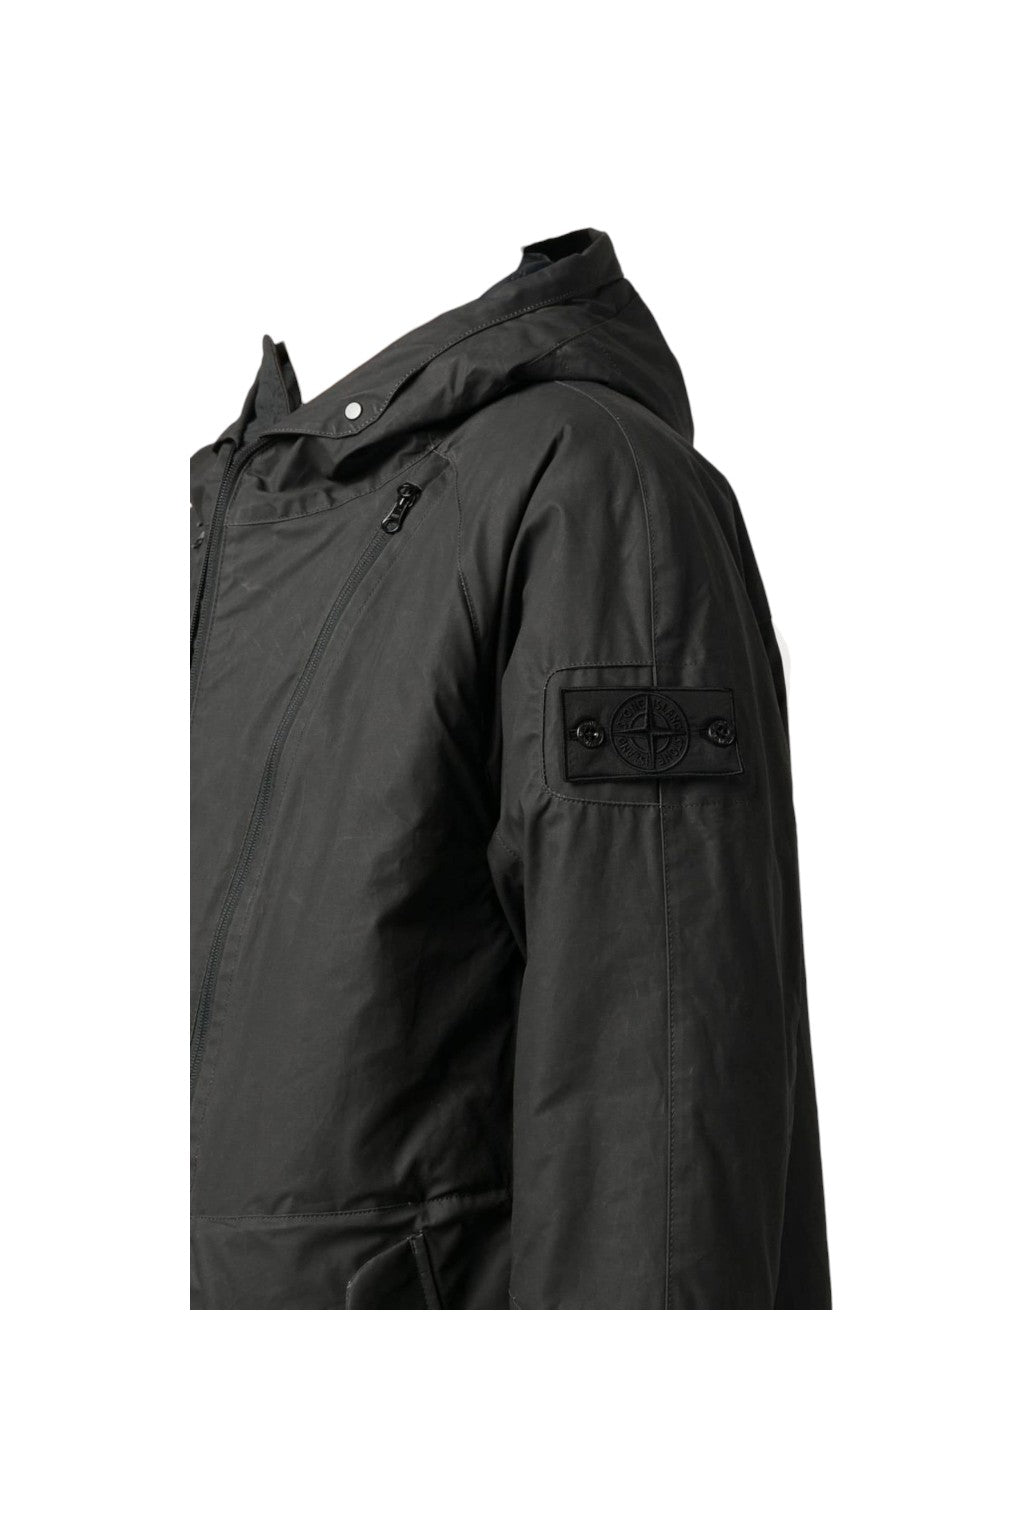 Stone Island Shadow Project Zip-Up Hooded Parka